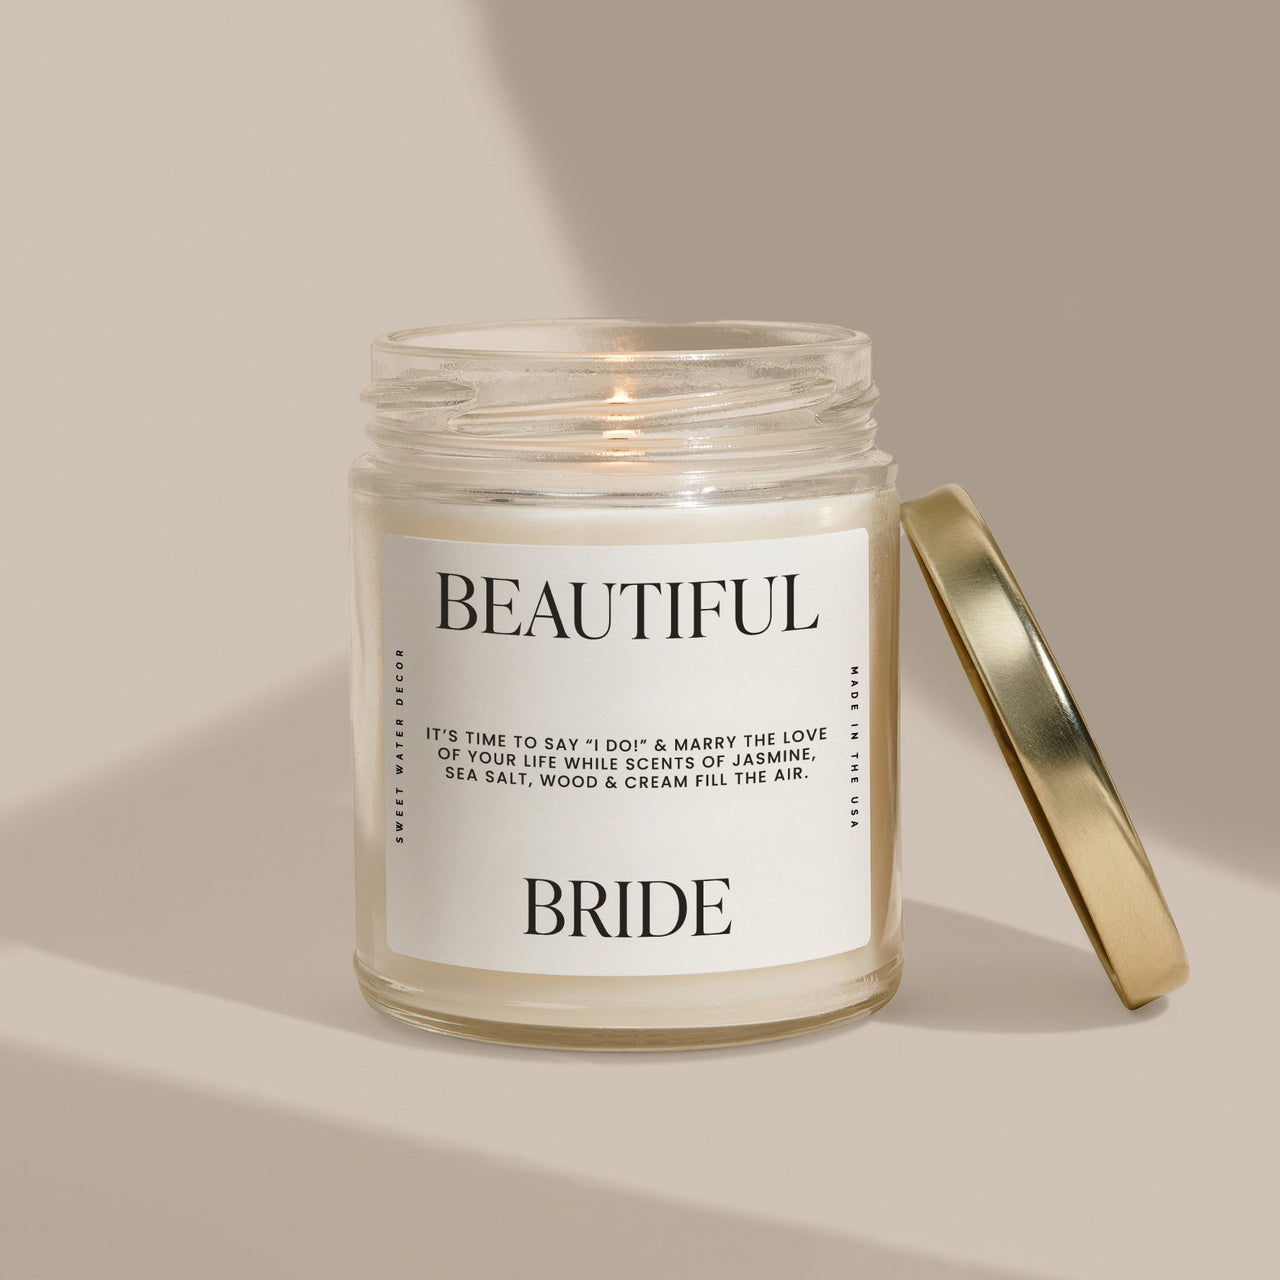 Beautiful Bride Soy Candle - Large Quote Label - 9 oz - Tony's Home Furnishings